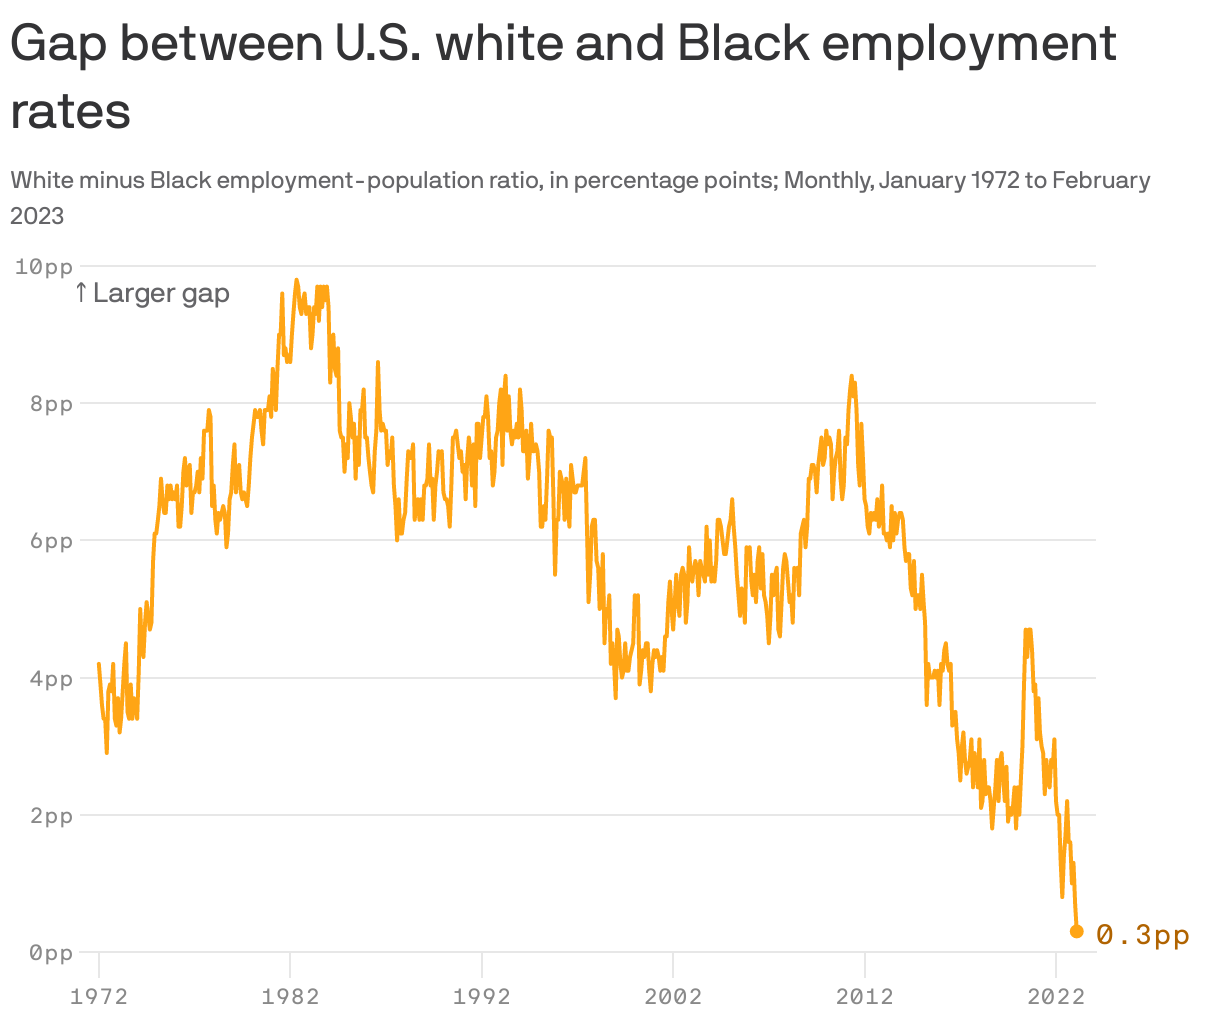 Gap between U.S. white and Black employment rates